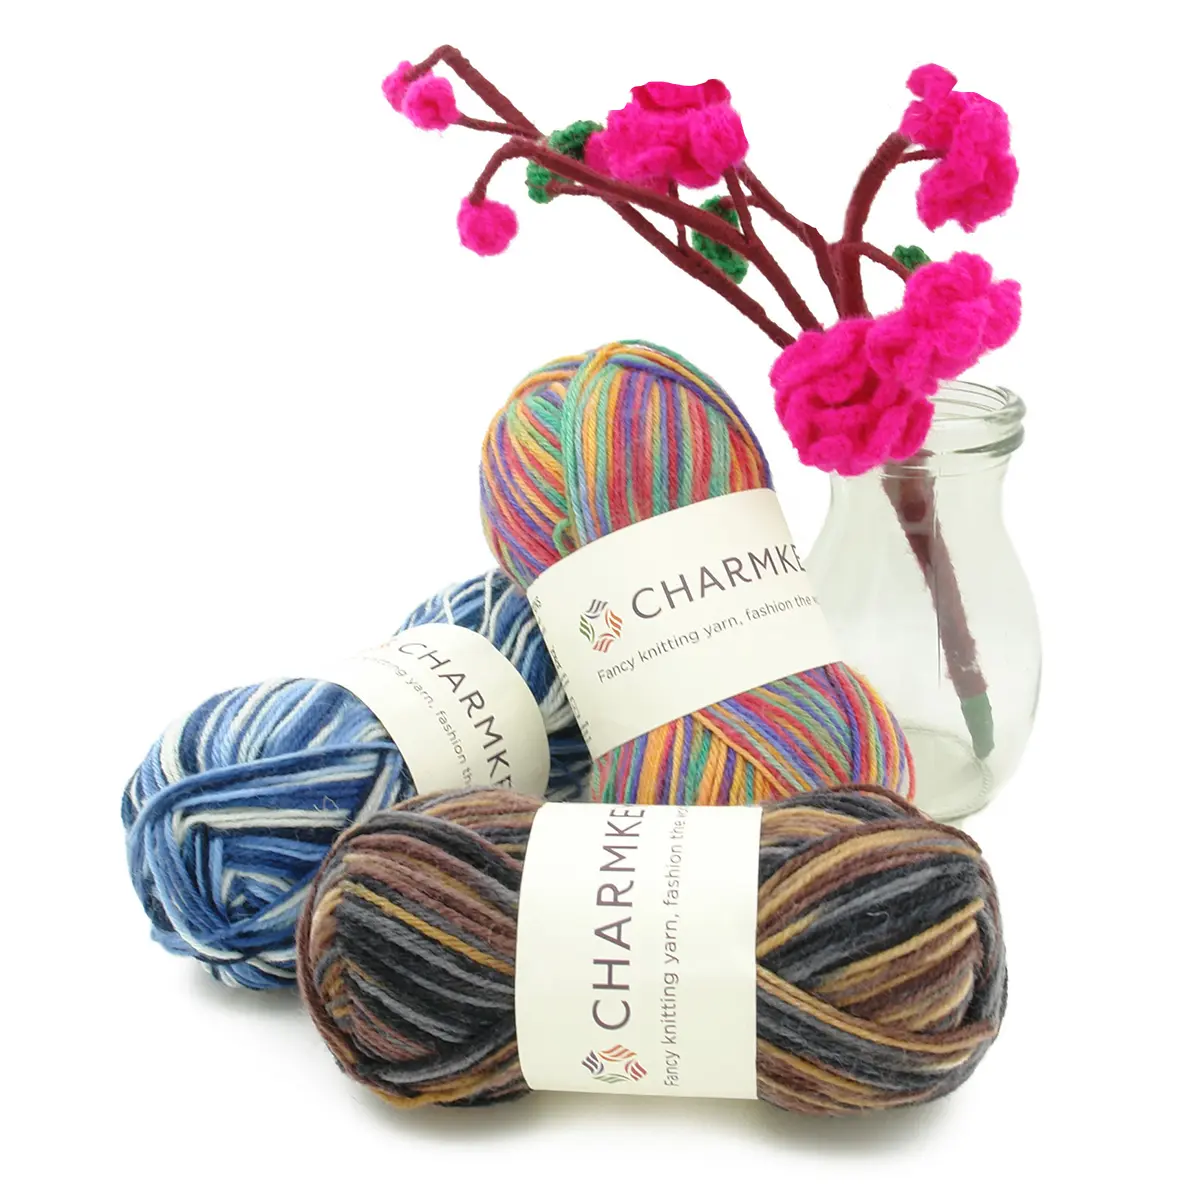 Charmkey high quality wool and nylon blend yarn for knitting beautiful clothes